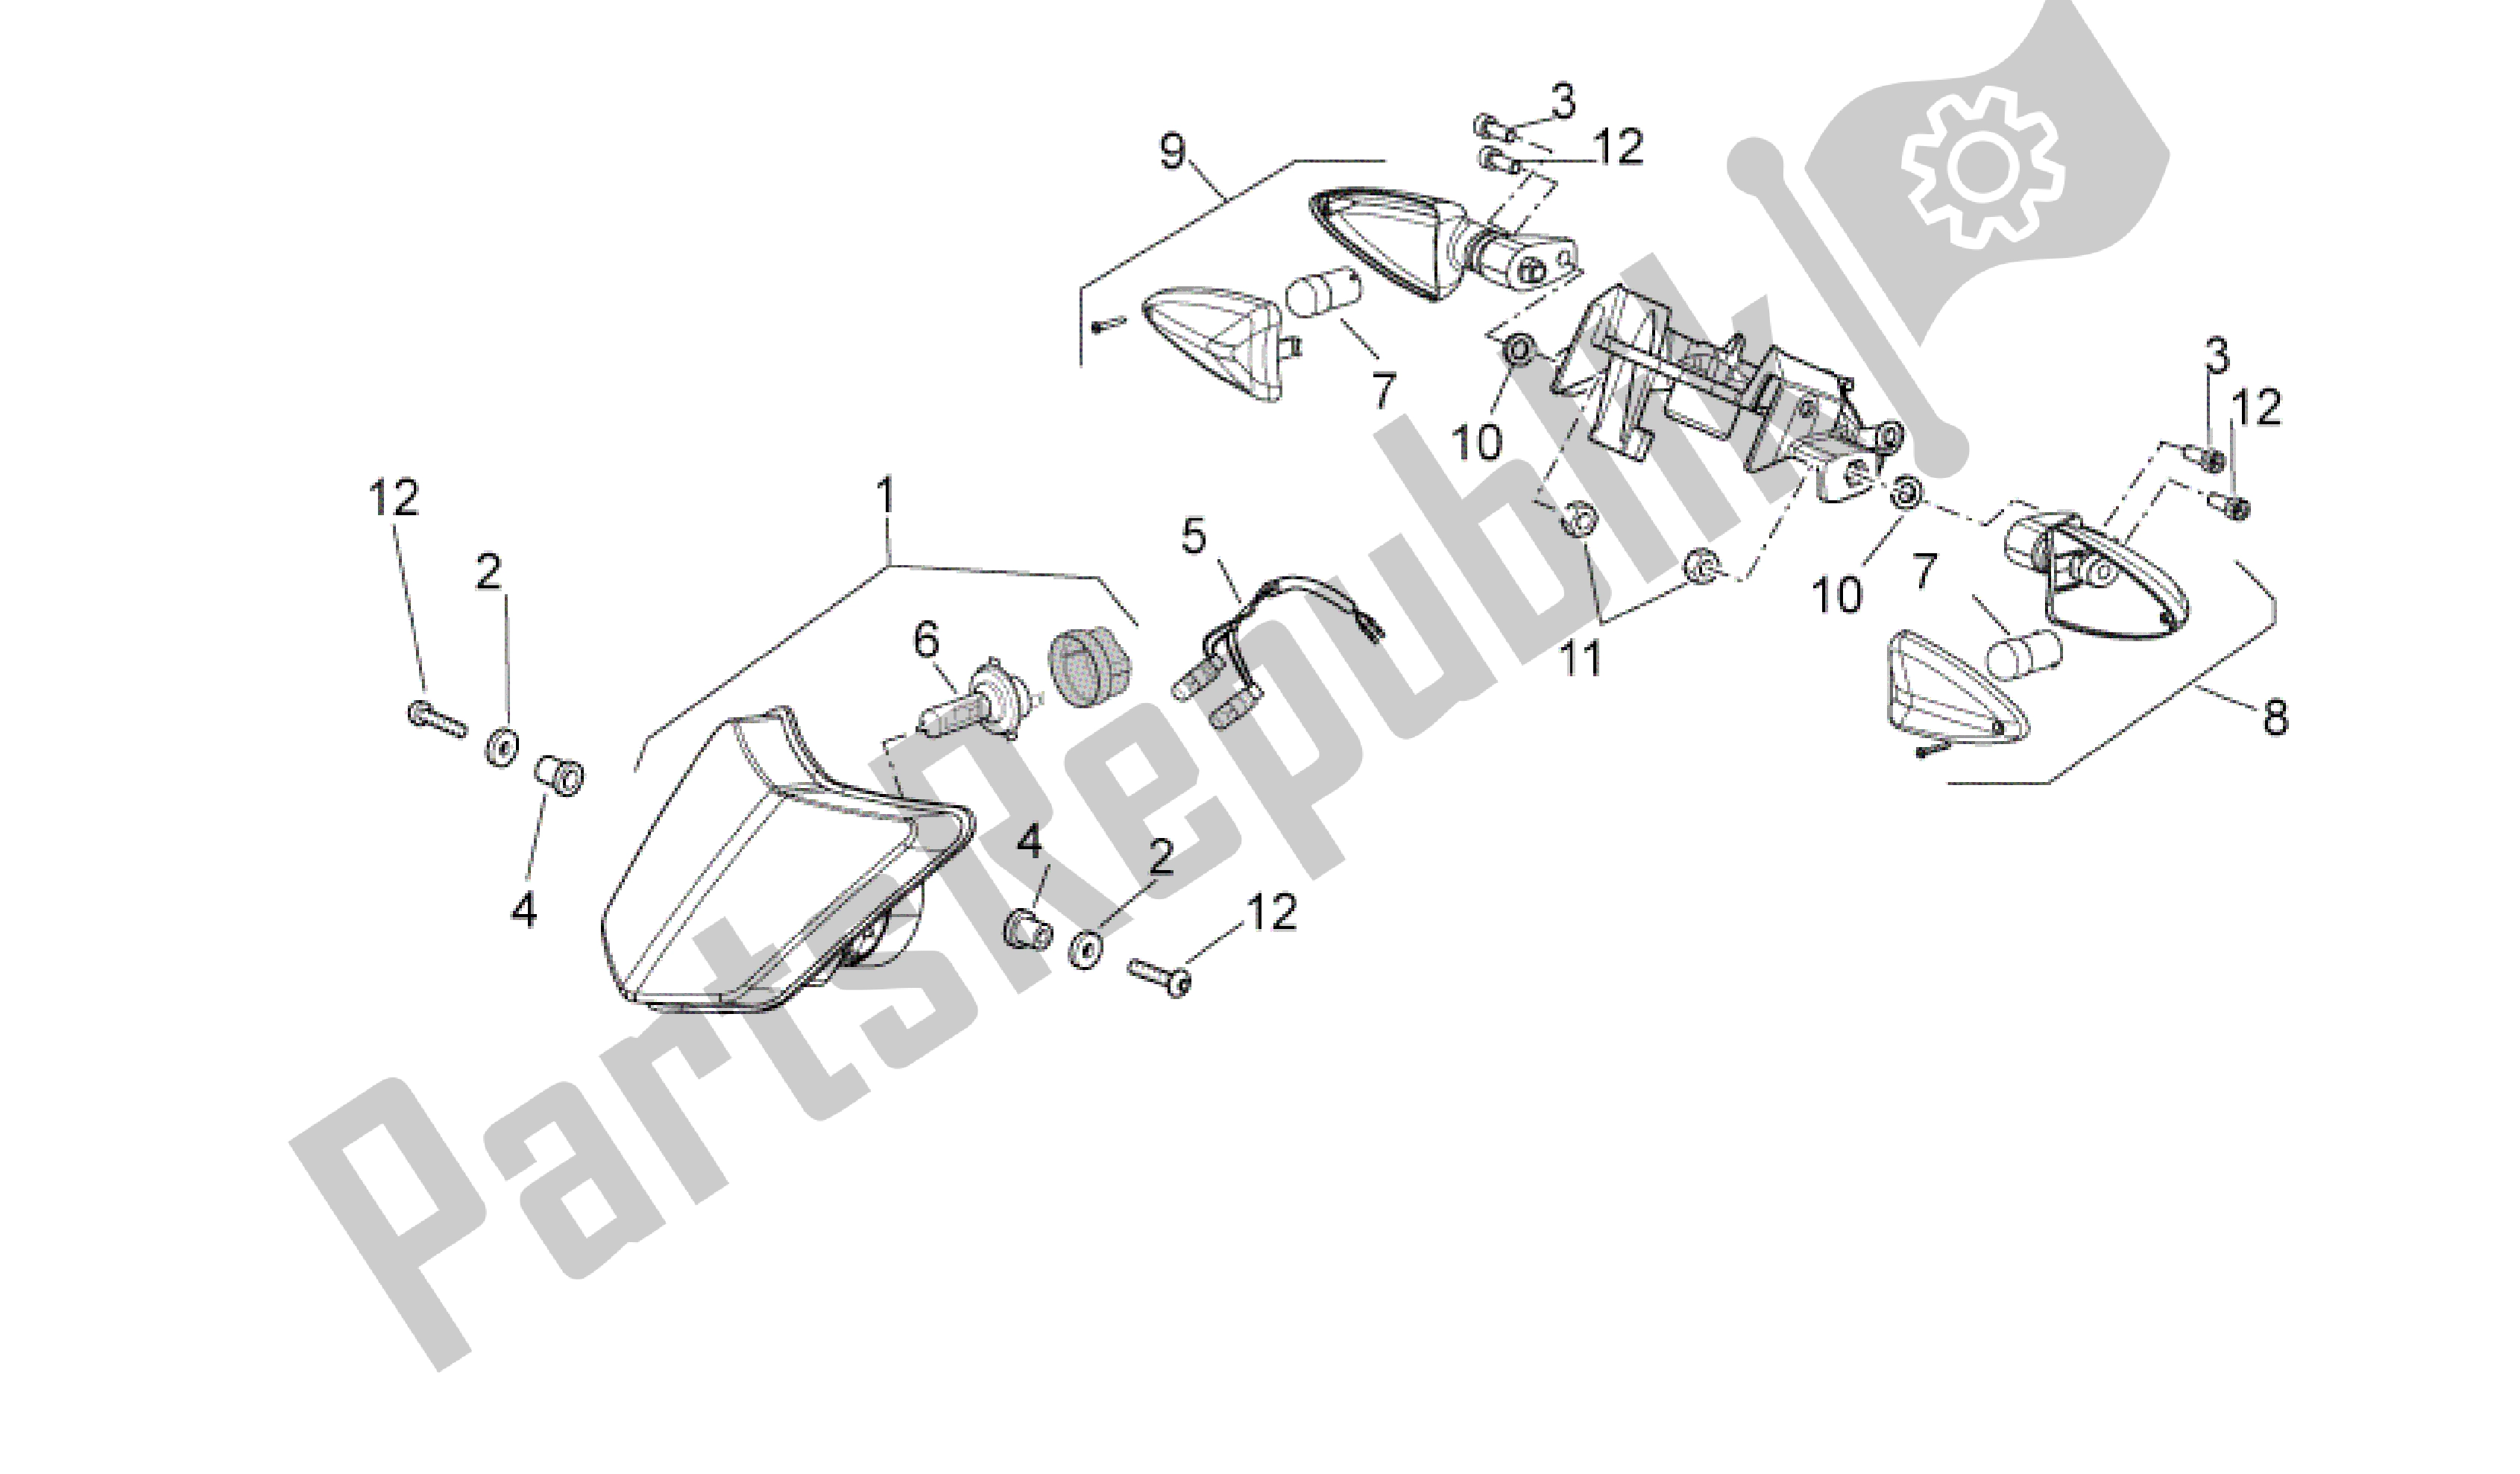 All parts for the Front Lights of the Aprilia SXV 550 2009 - 2011